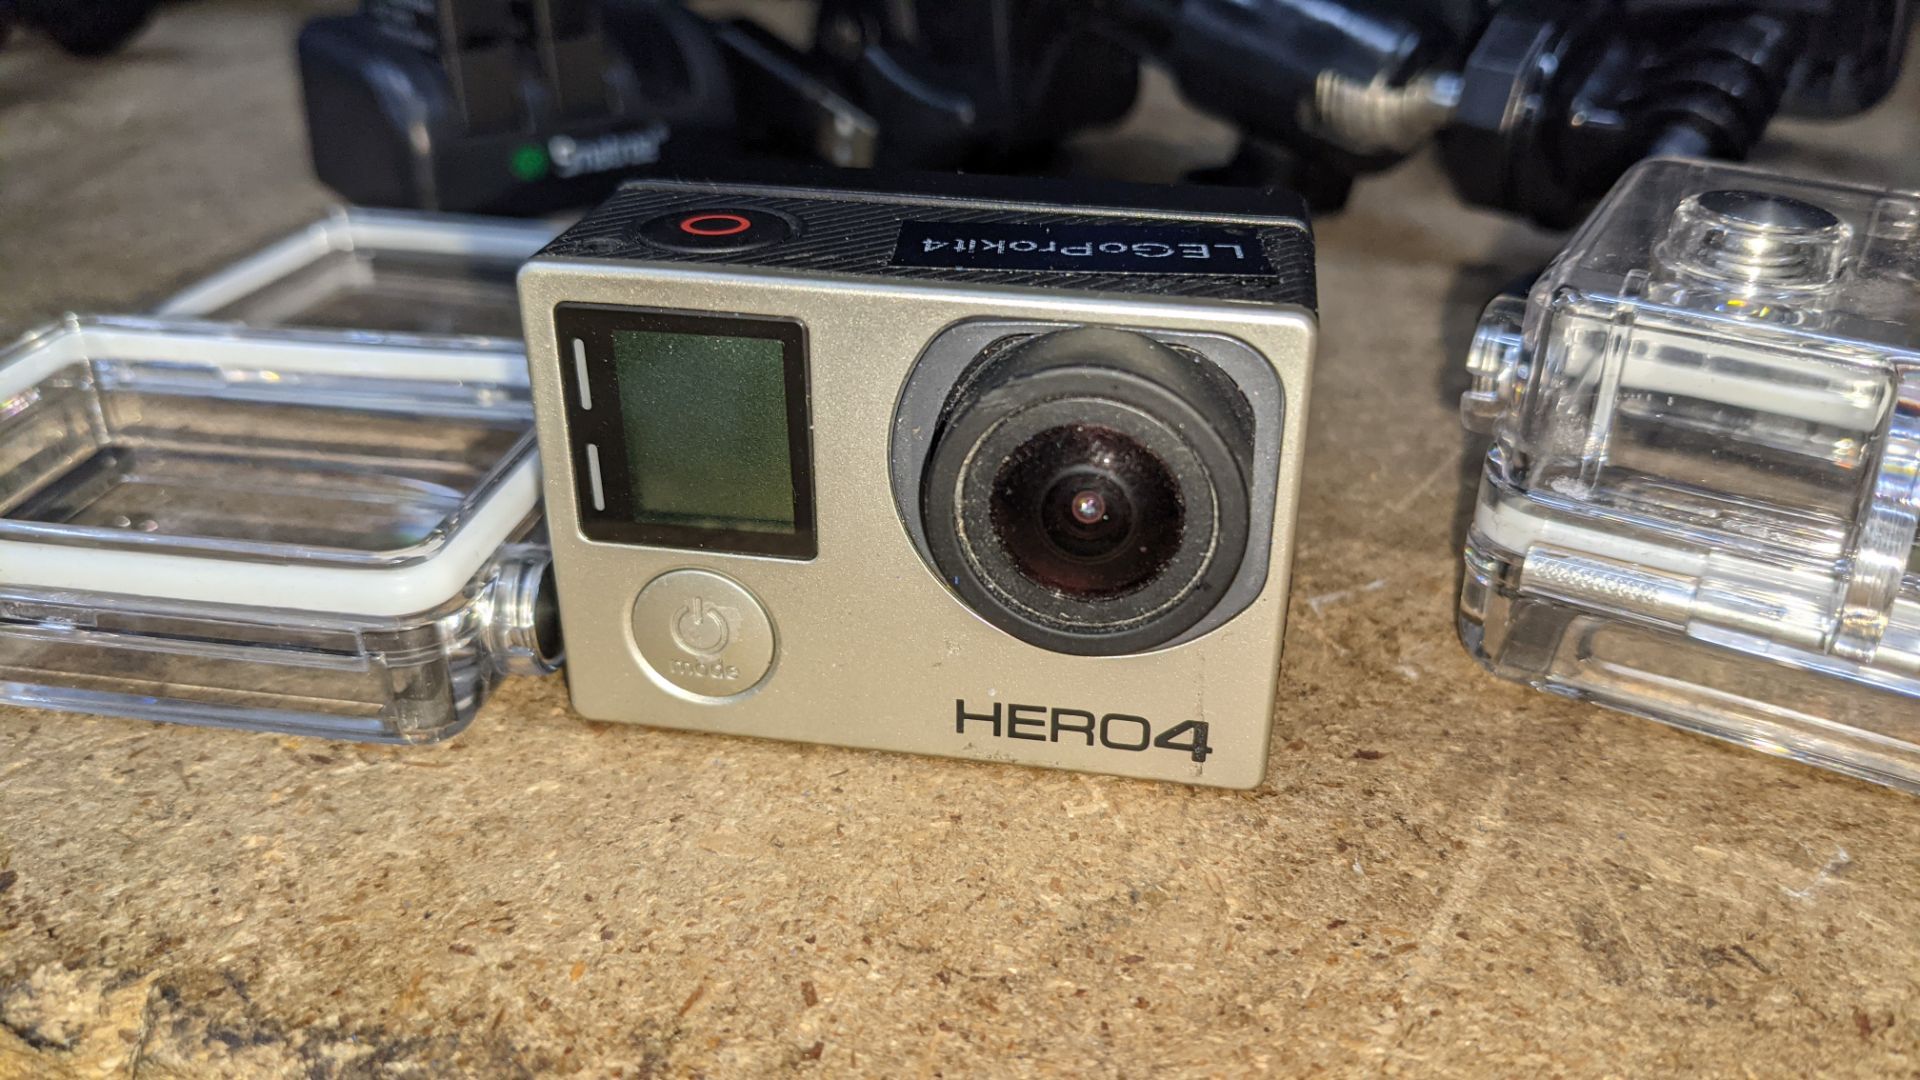 GoPro Hero 4 camera kit comprising GoPro Hero 4 plus wide variety of batteries, chargers, cases & mo - Image 6 of 18